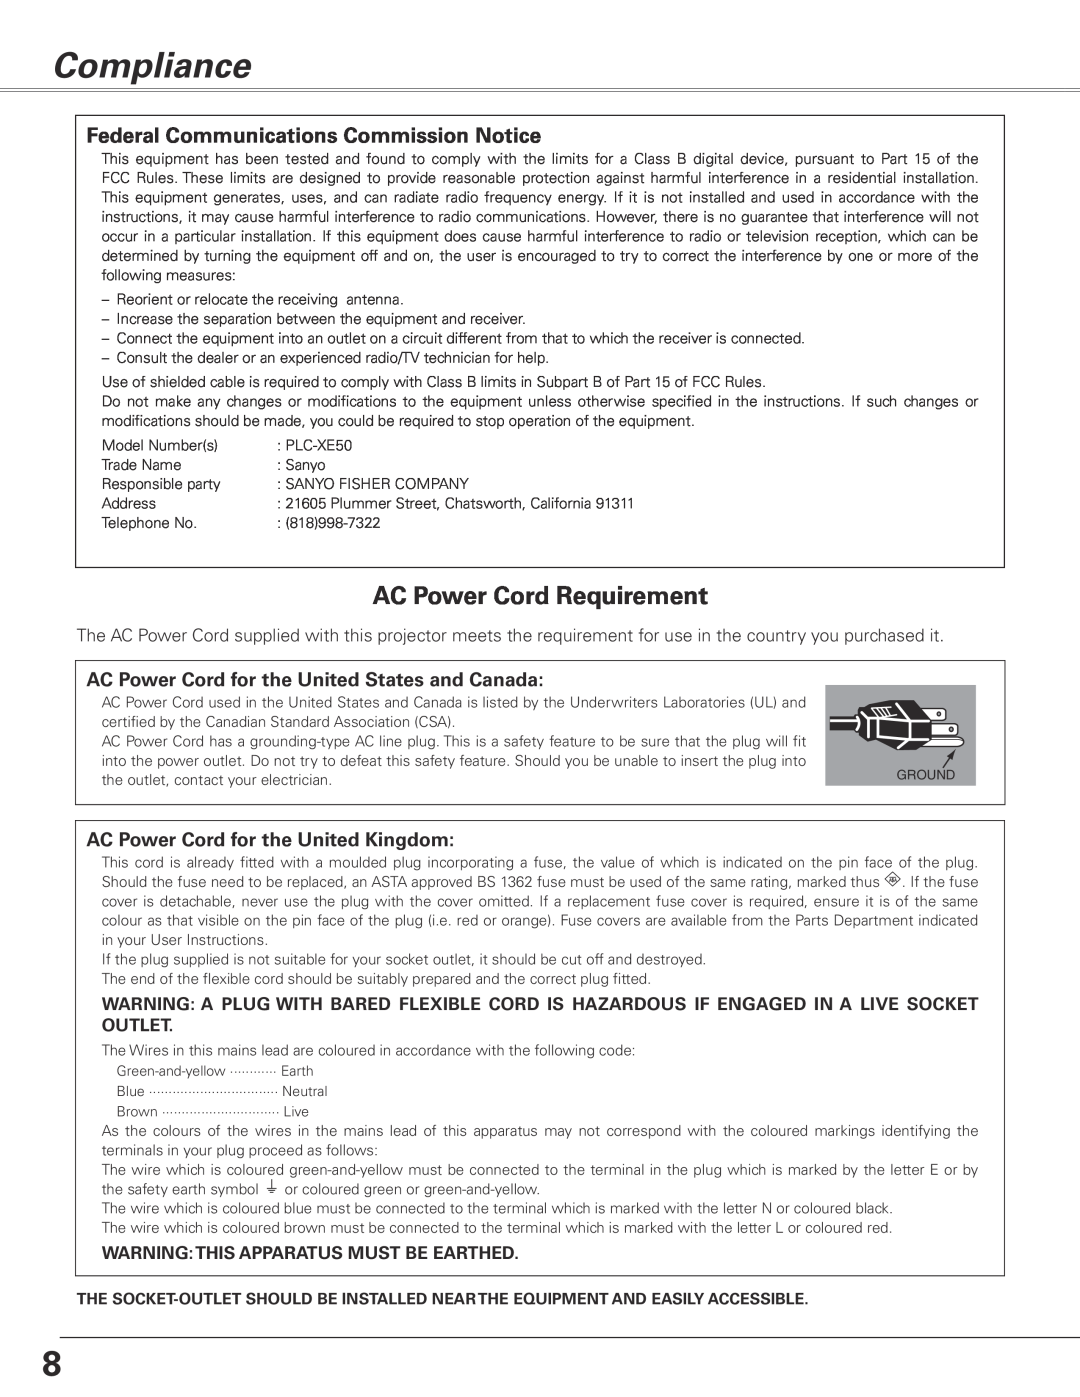 Sanyo PLC-XE50 owner manual Compliance, AC Power Cord Requirement, Federal Communications Commission Notice 